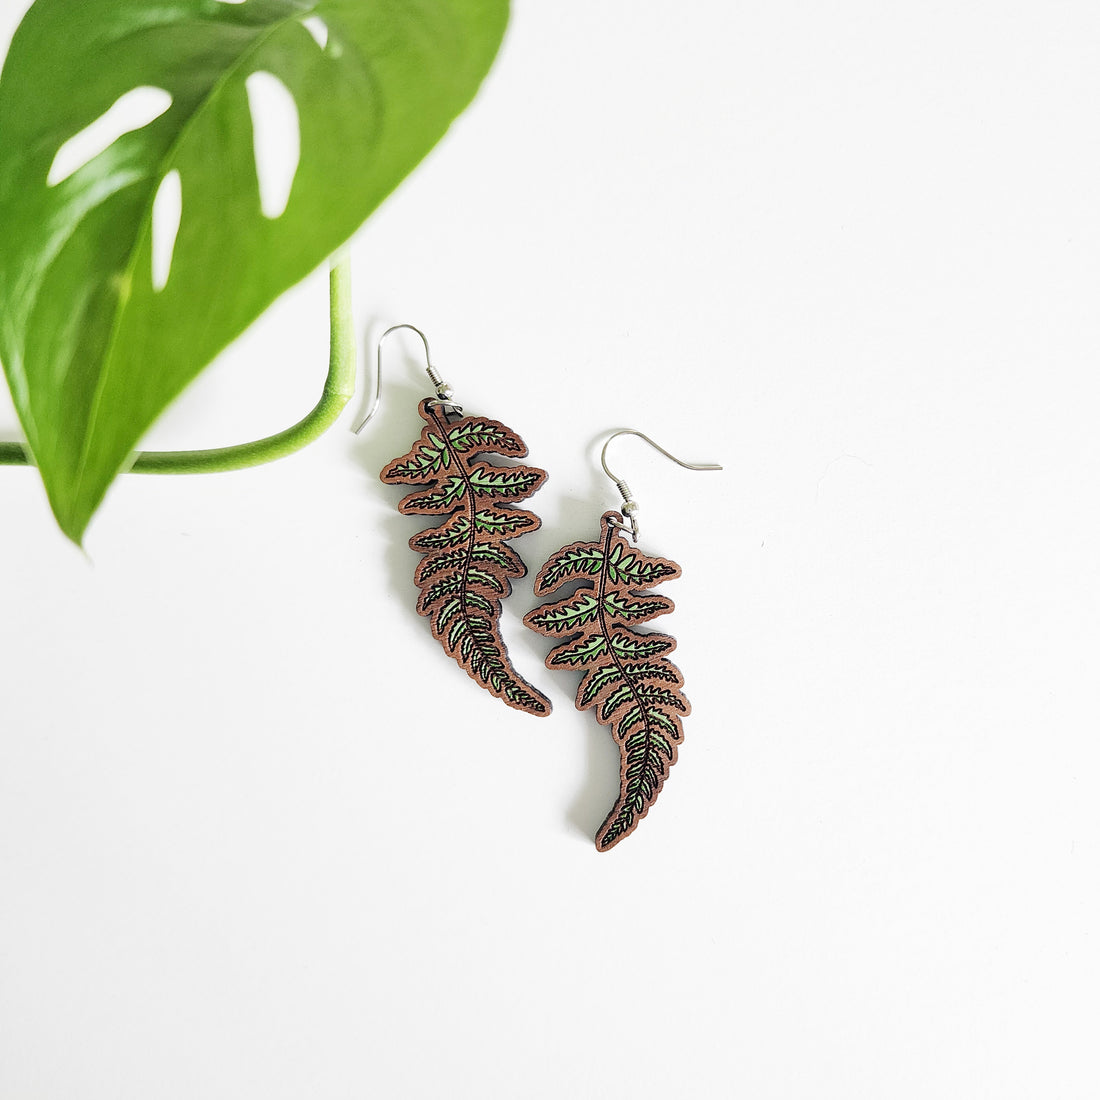 pair of fern leaf earrings on a white background next to a leaf